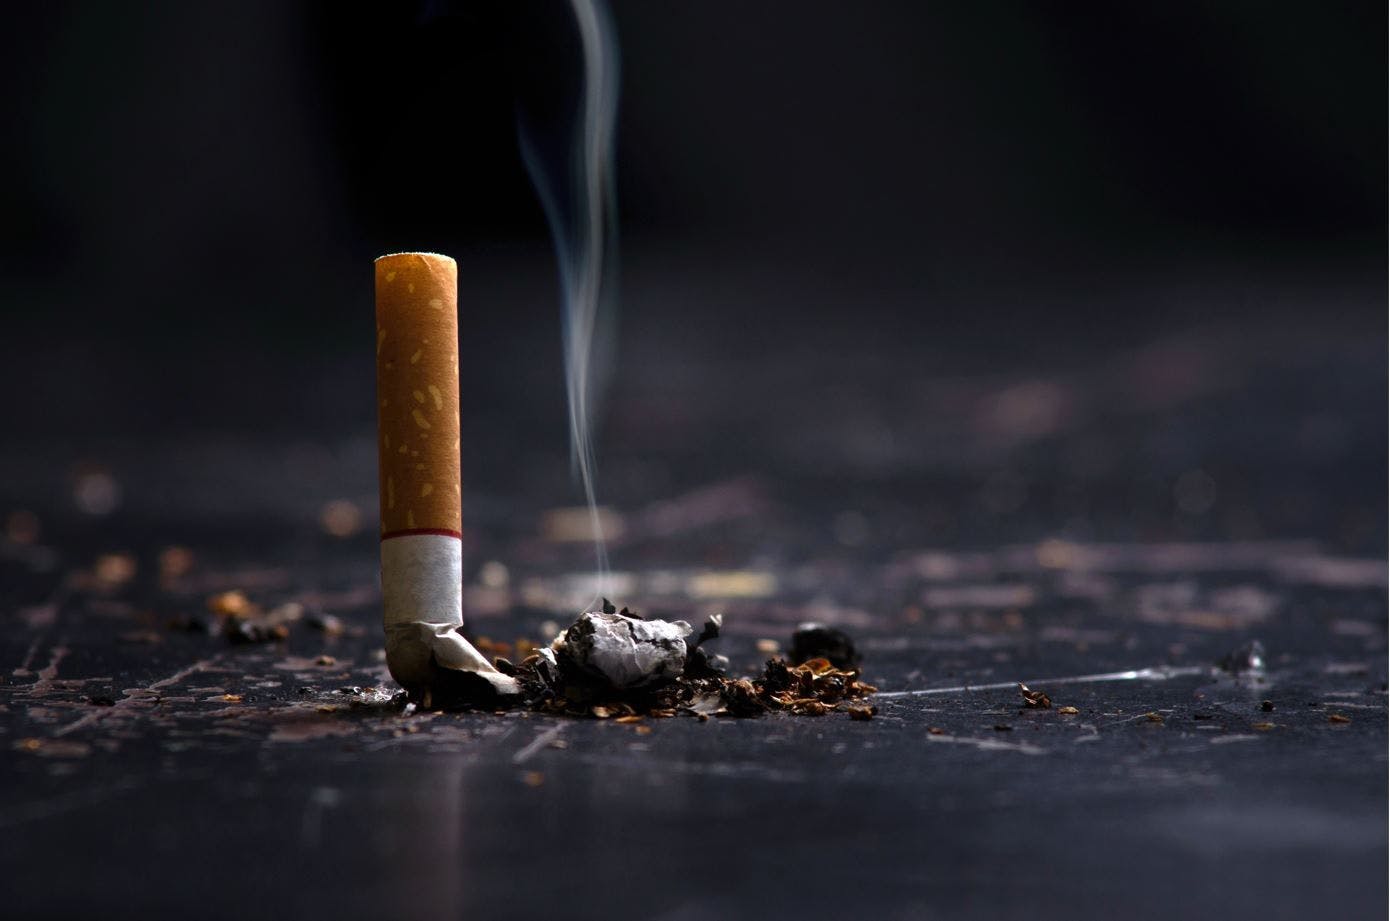 Former Smokers who Adhere to Healthy Lifestyle Lower Their Risk of Early Death, Large Analysis Finds